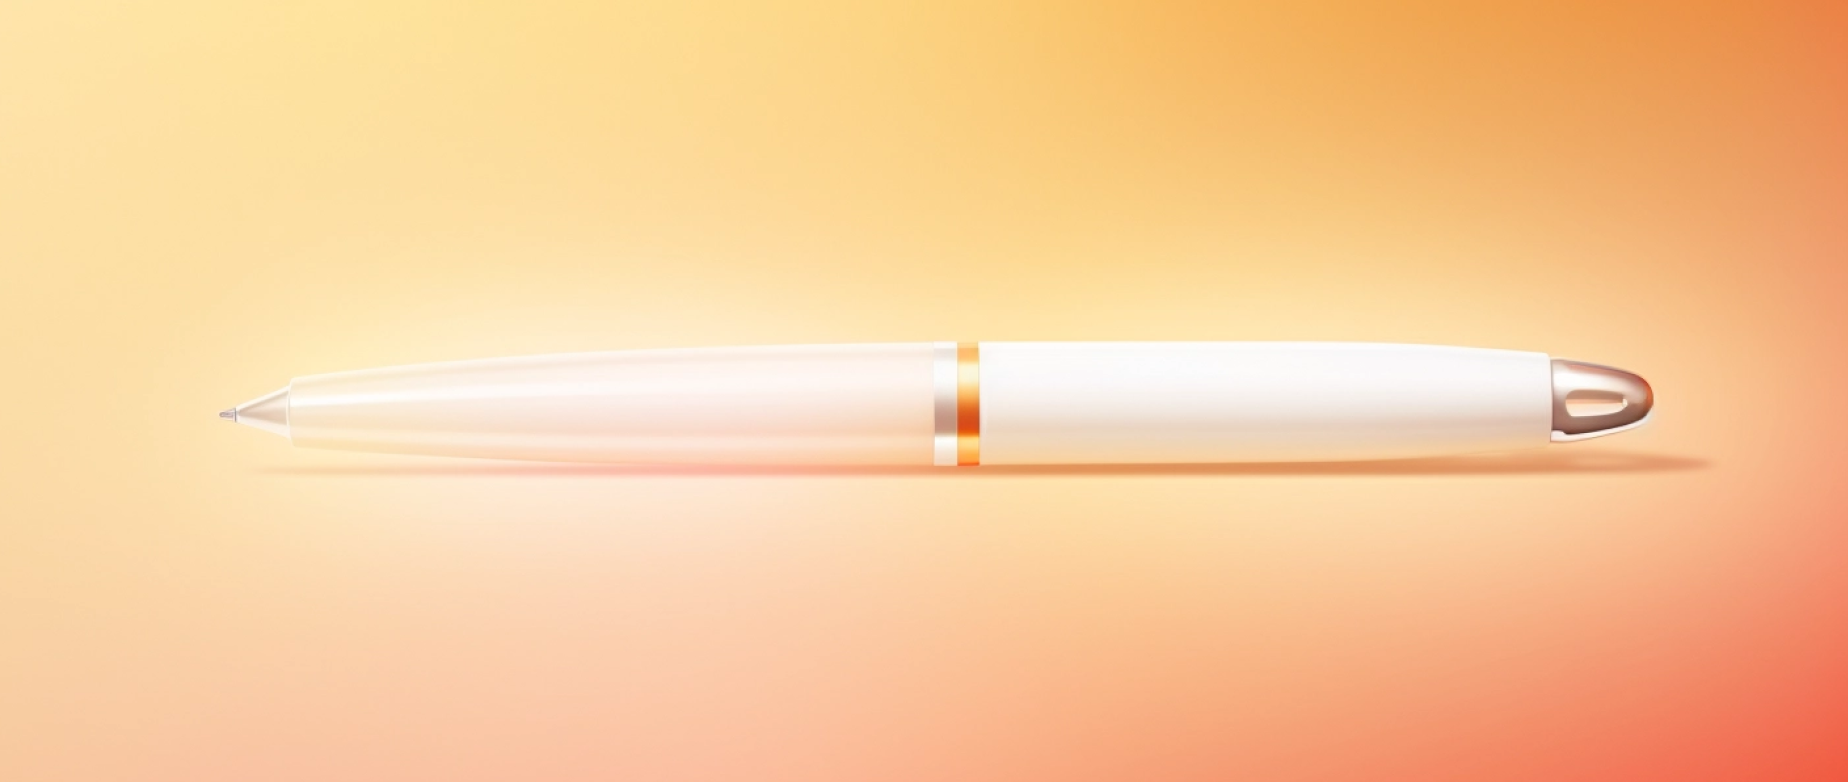 A white pen laying on an orange background.